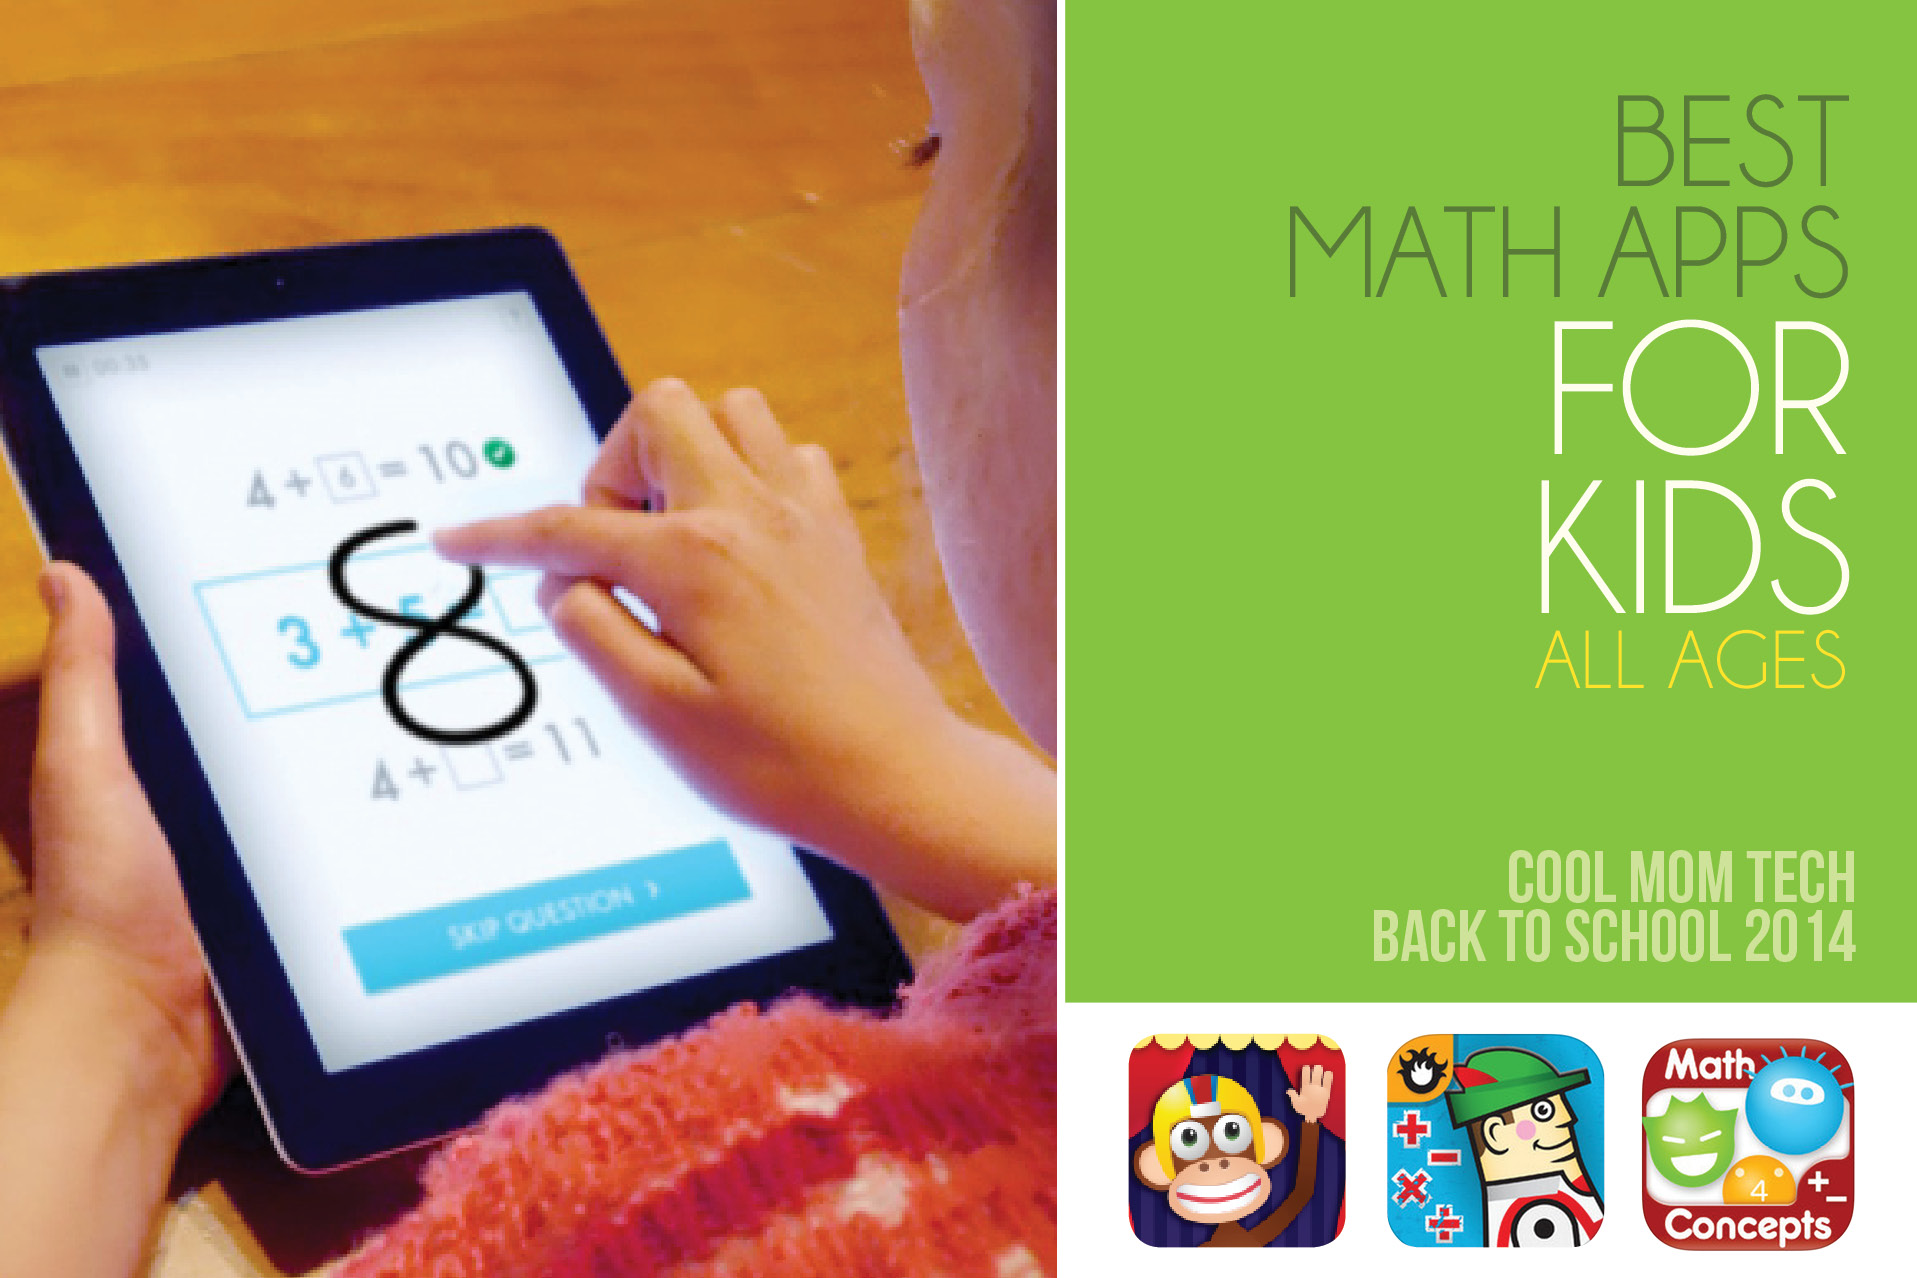 16 best math apps for kids of all ages: Back to school tech guide 2014